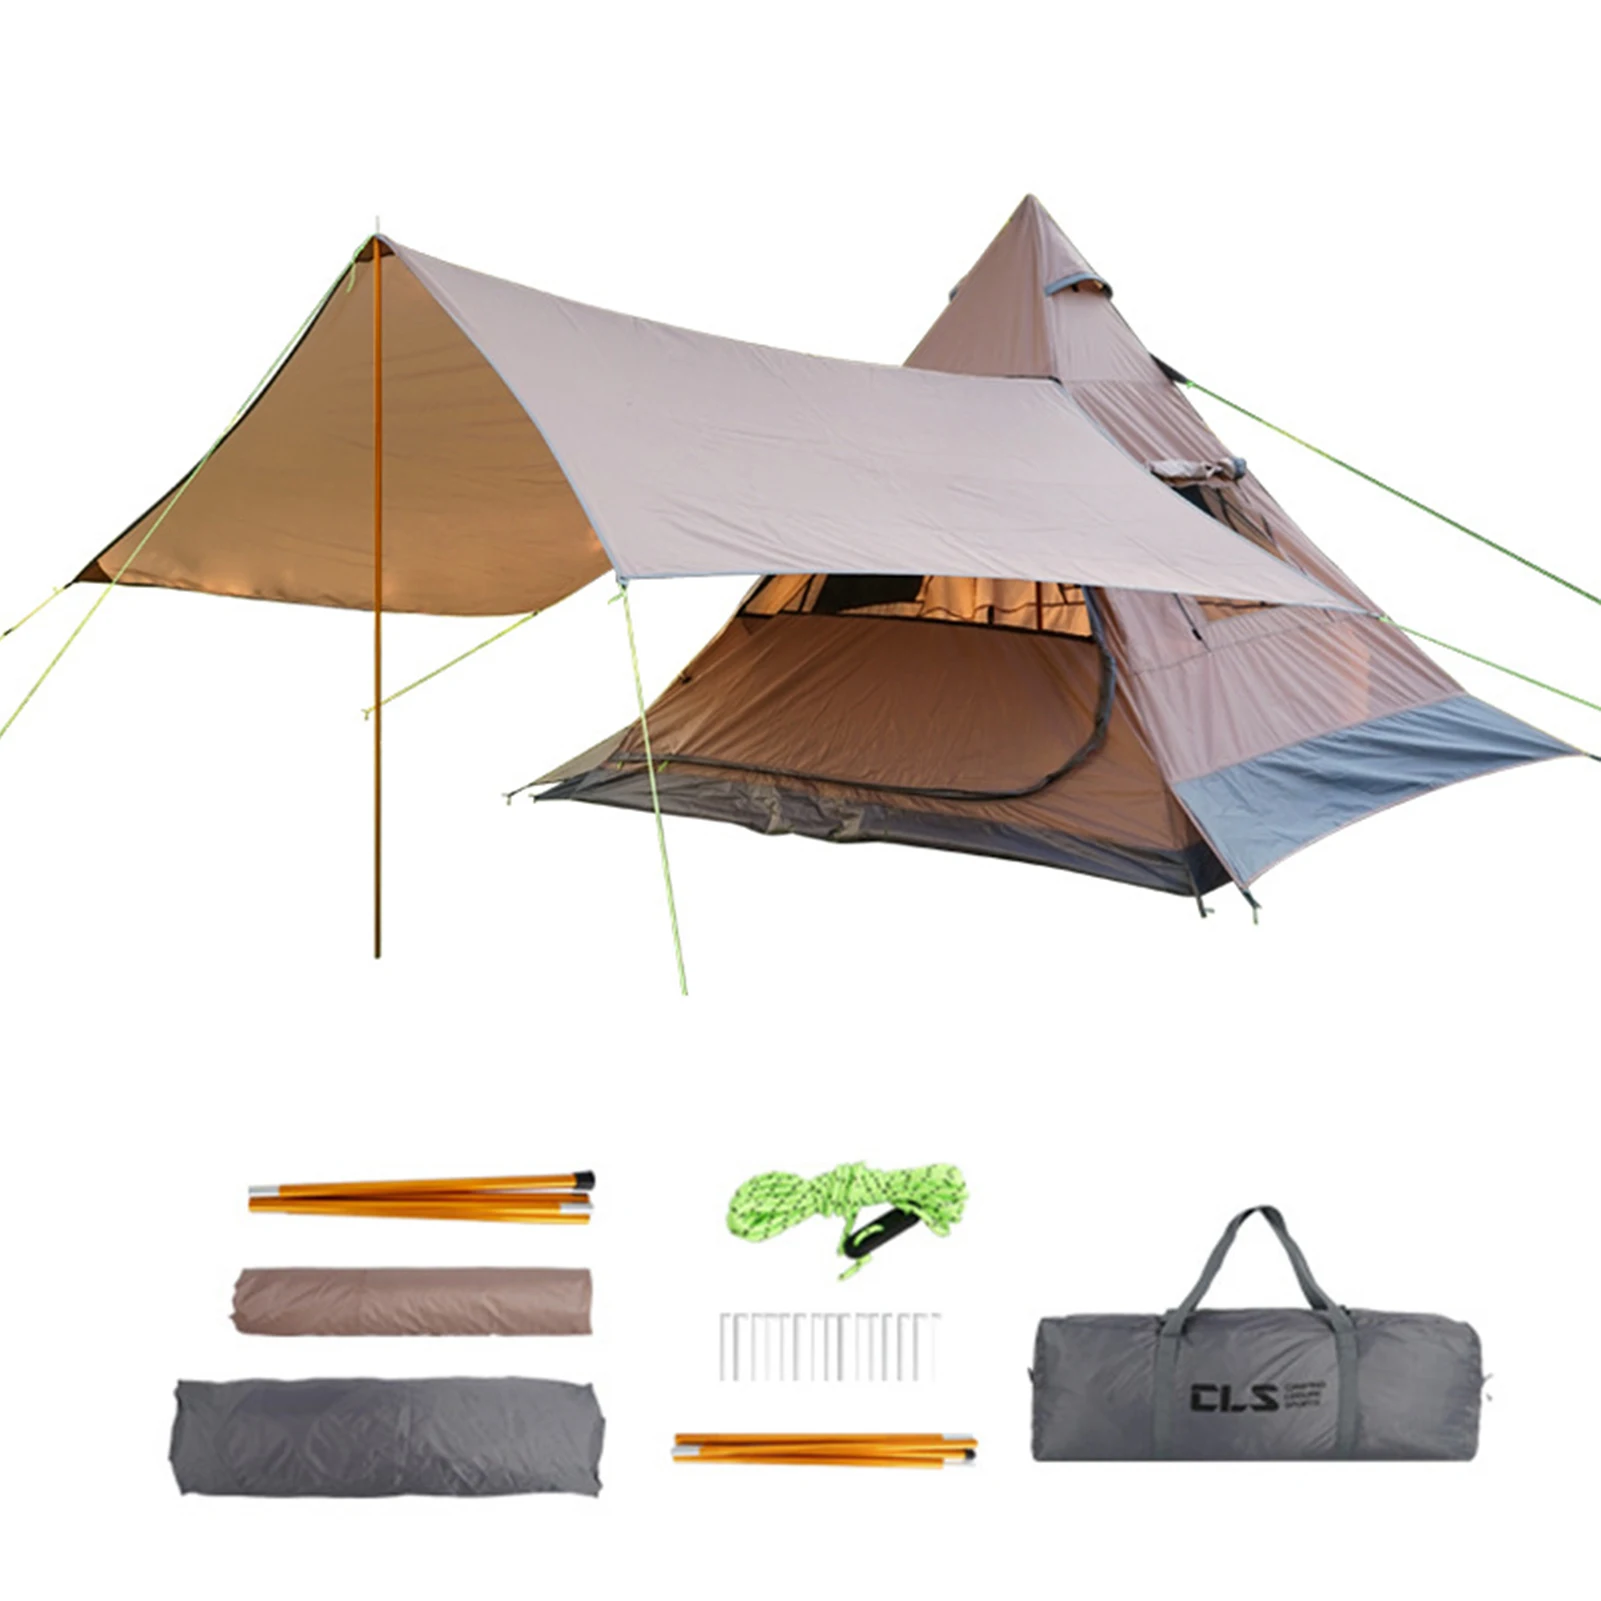 

Camping Tents 4 People Easy Setup Portable Outdoor Compact Large Tent For Family Waterproof Backpacking Hiking Stand Up Cabin